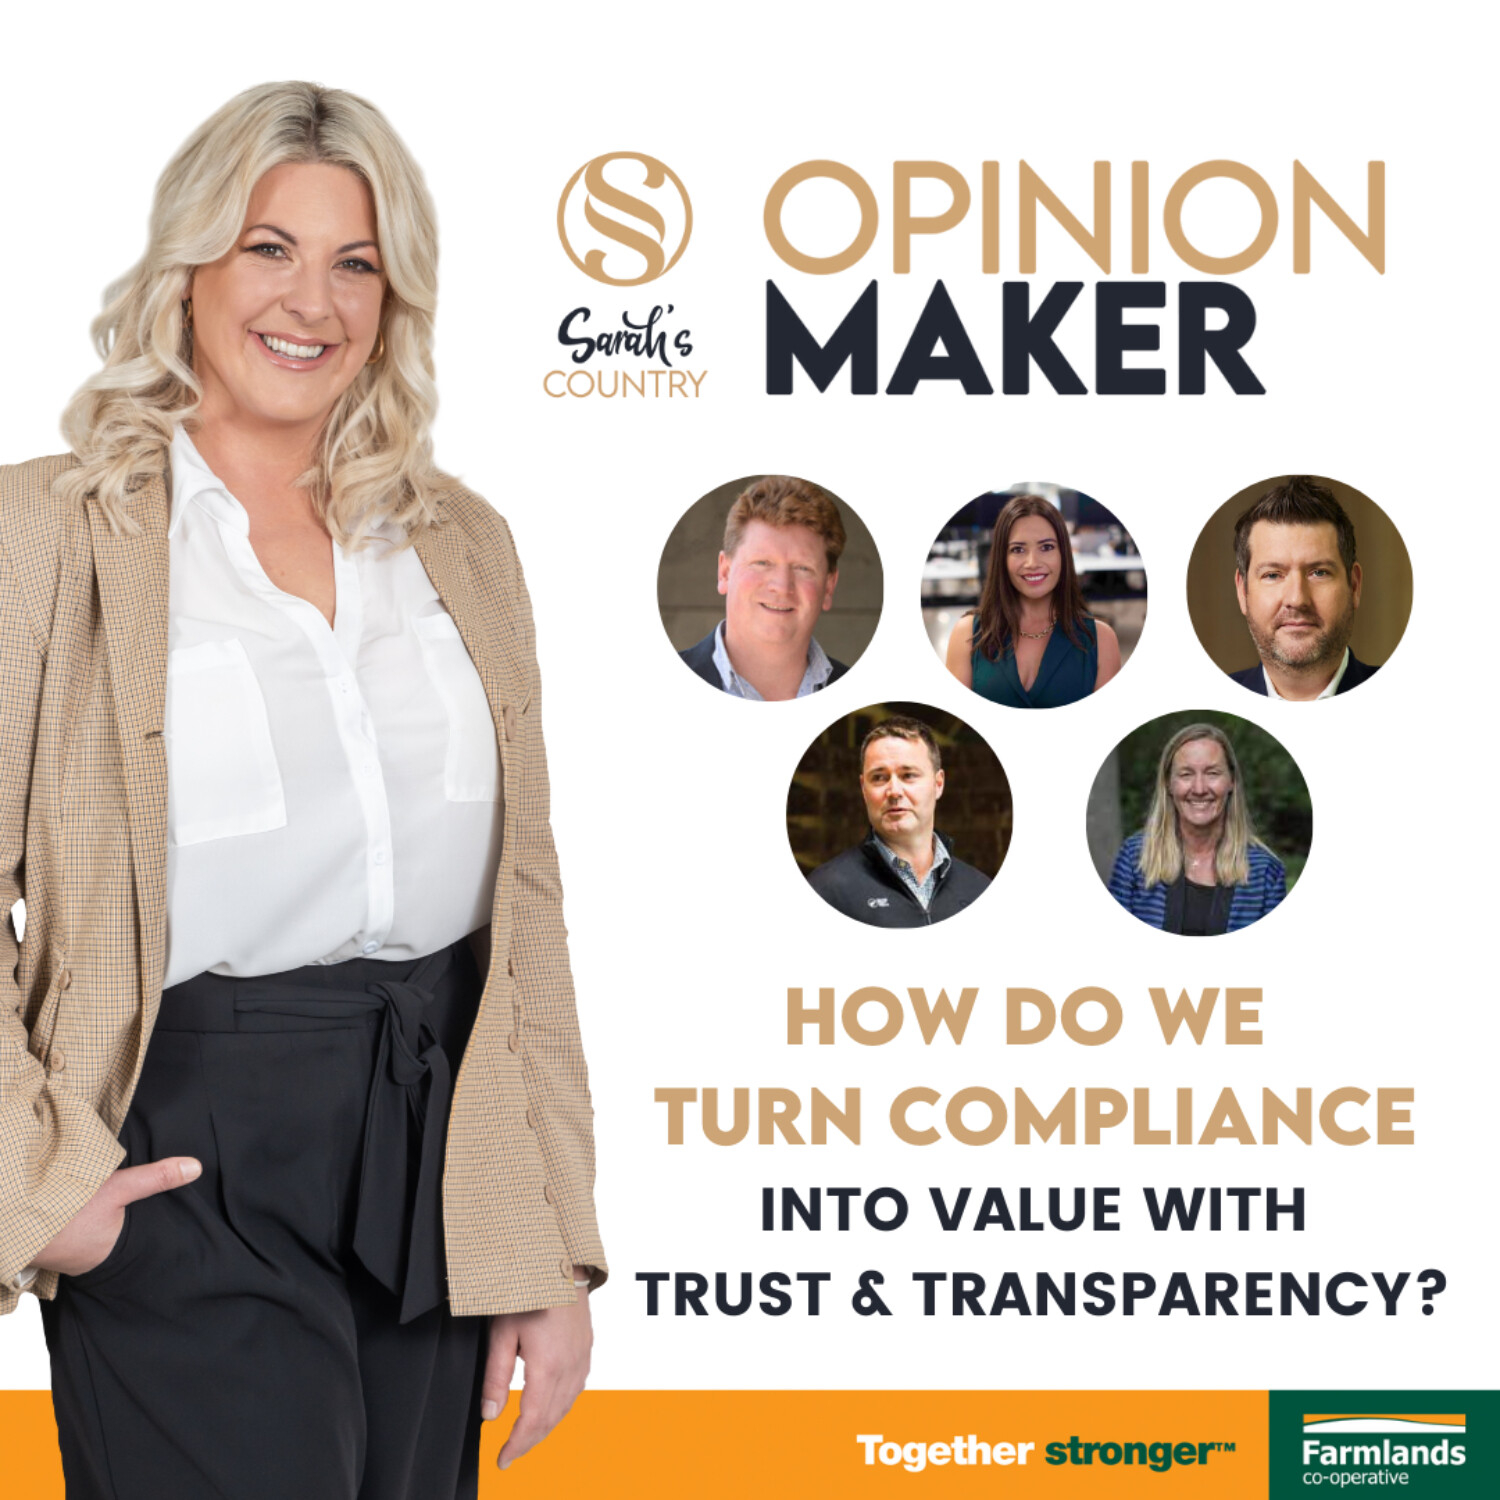 How do we turn compliance into value with trust & transparency?